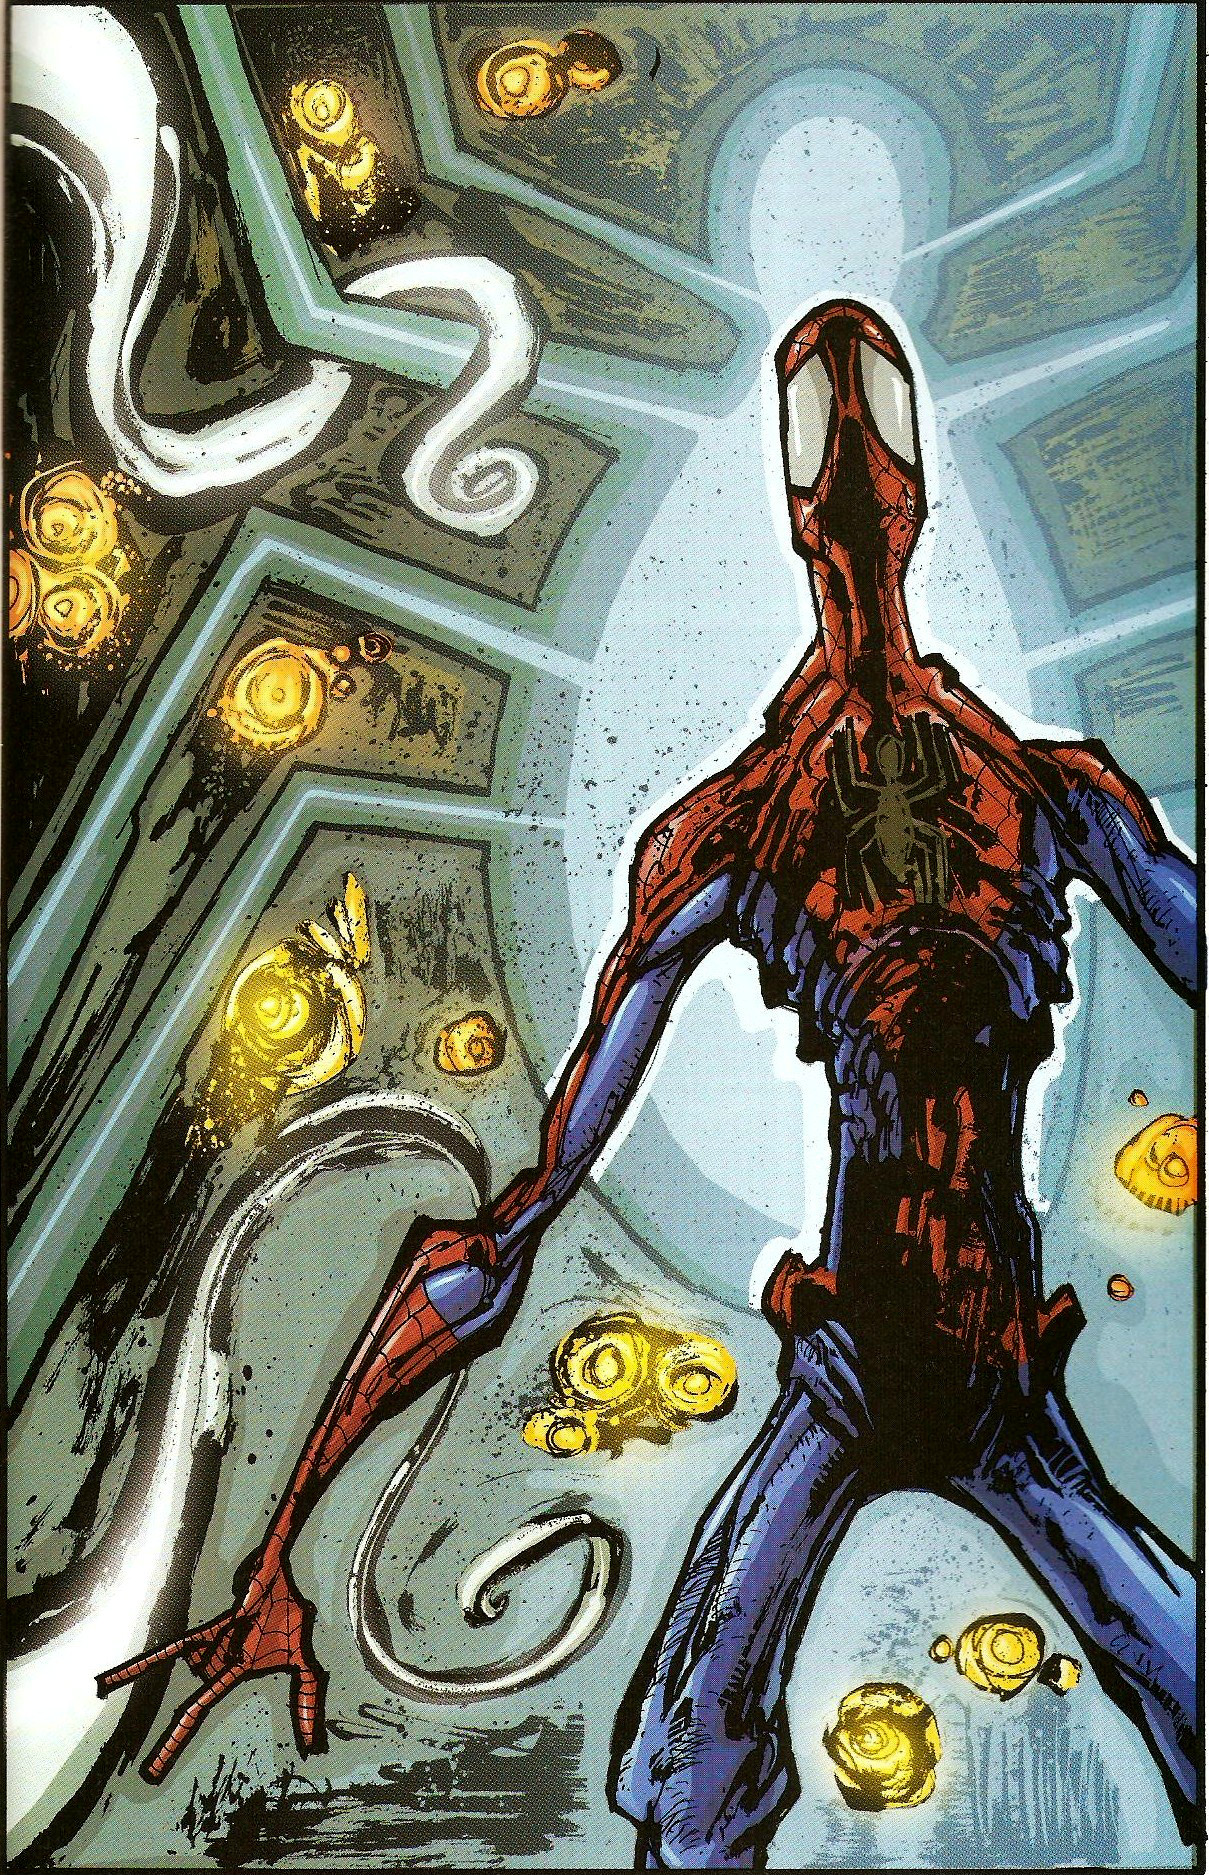 From Ultimate Marvel Team-Up #13 (2002)